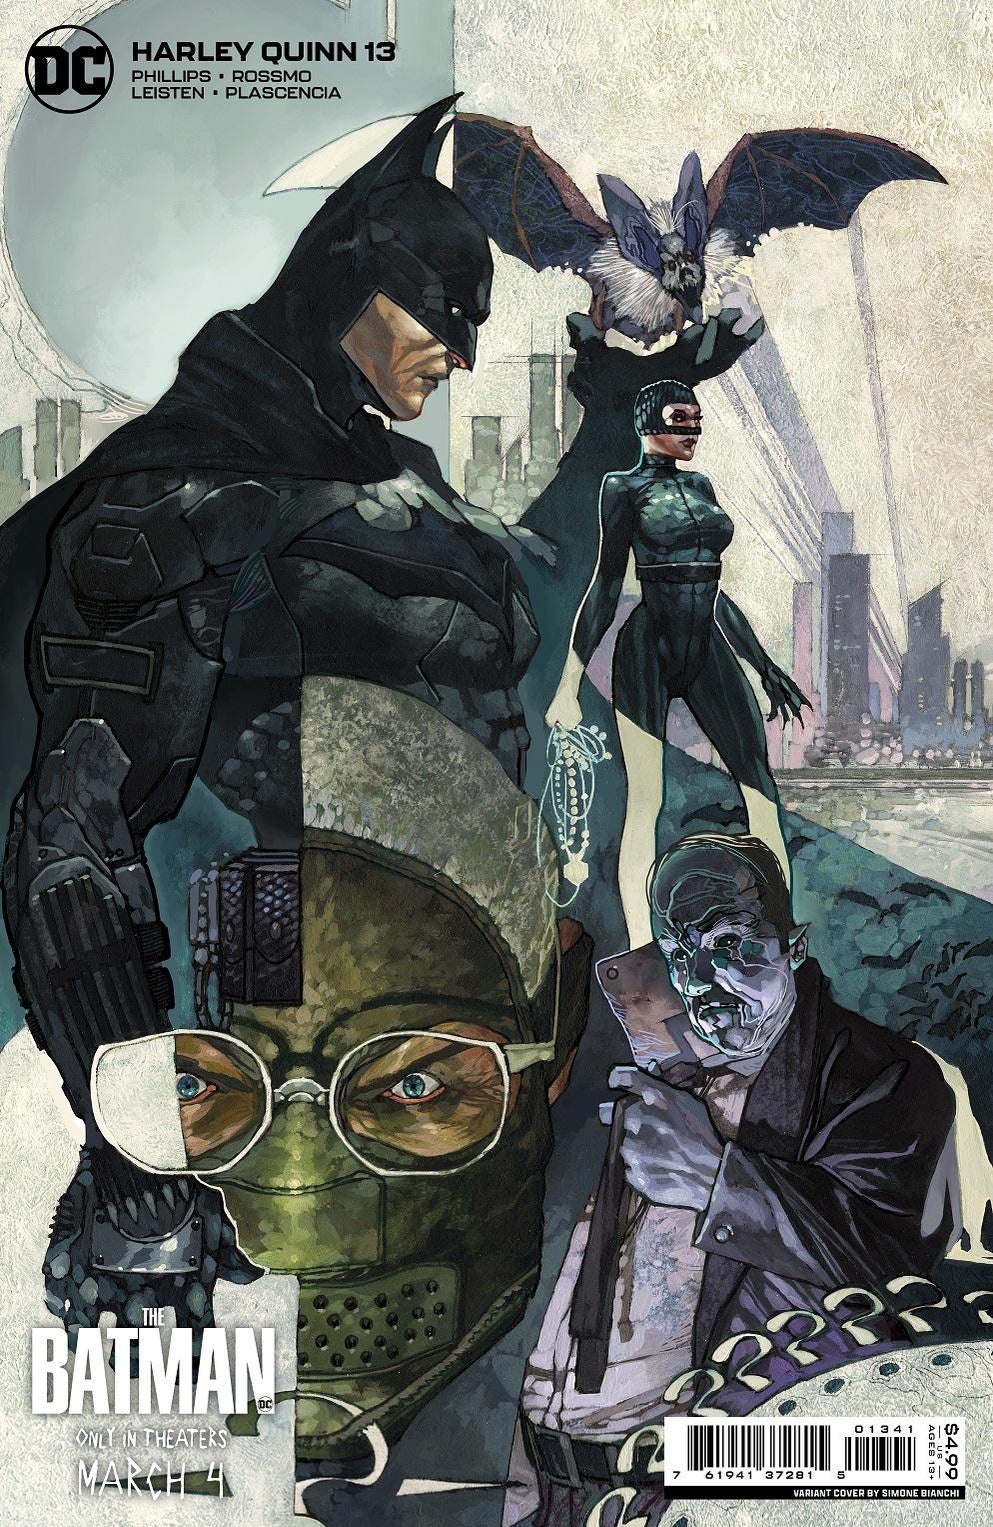 The Batman Movie Variant Comic Covers Revealed by DC